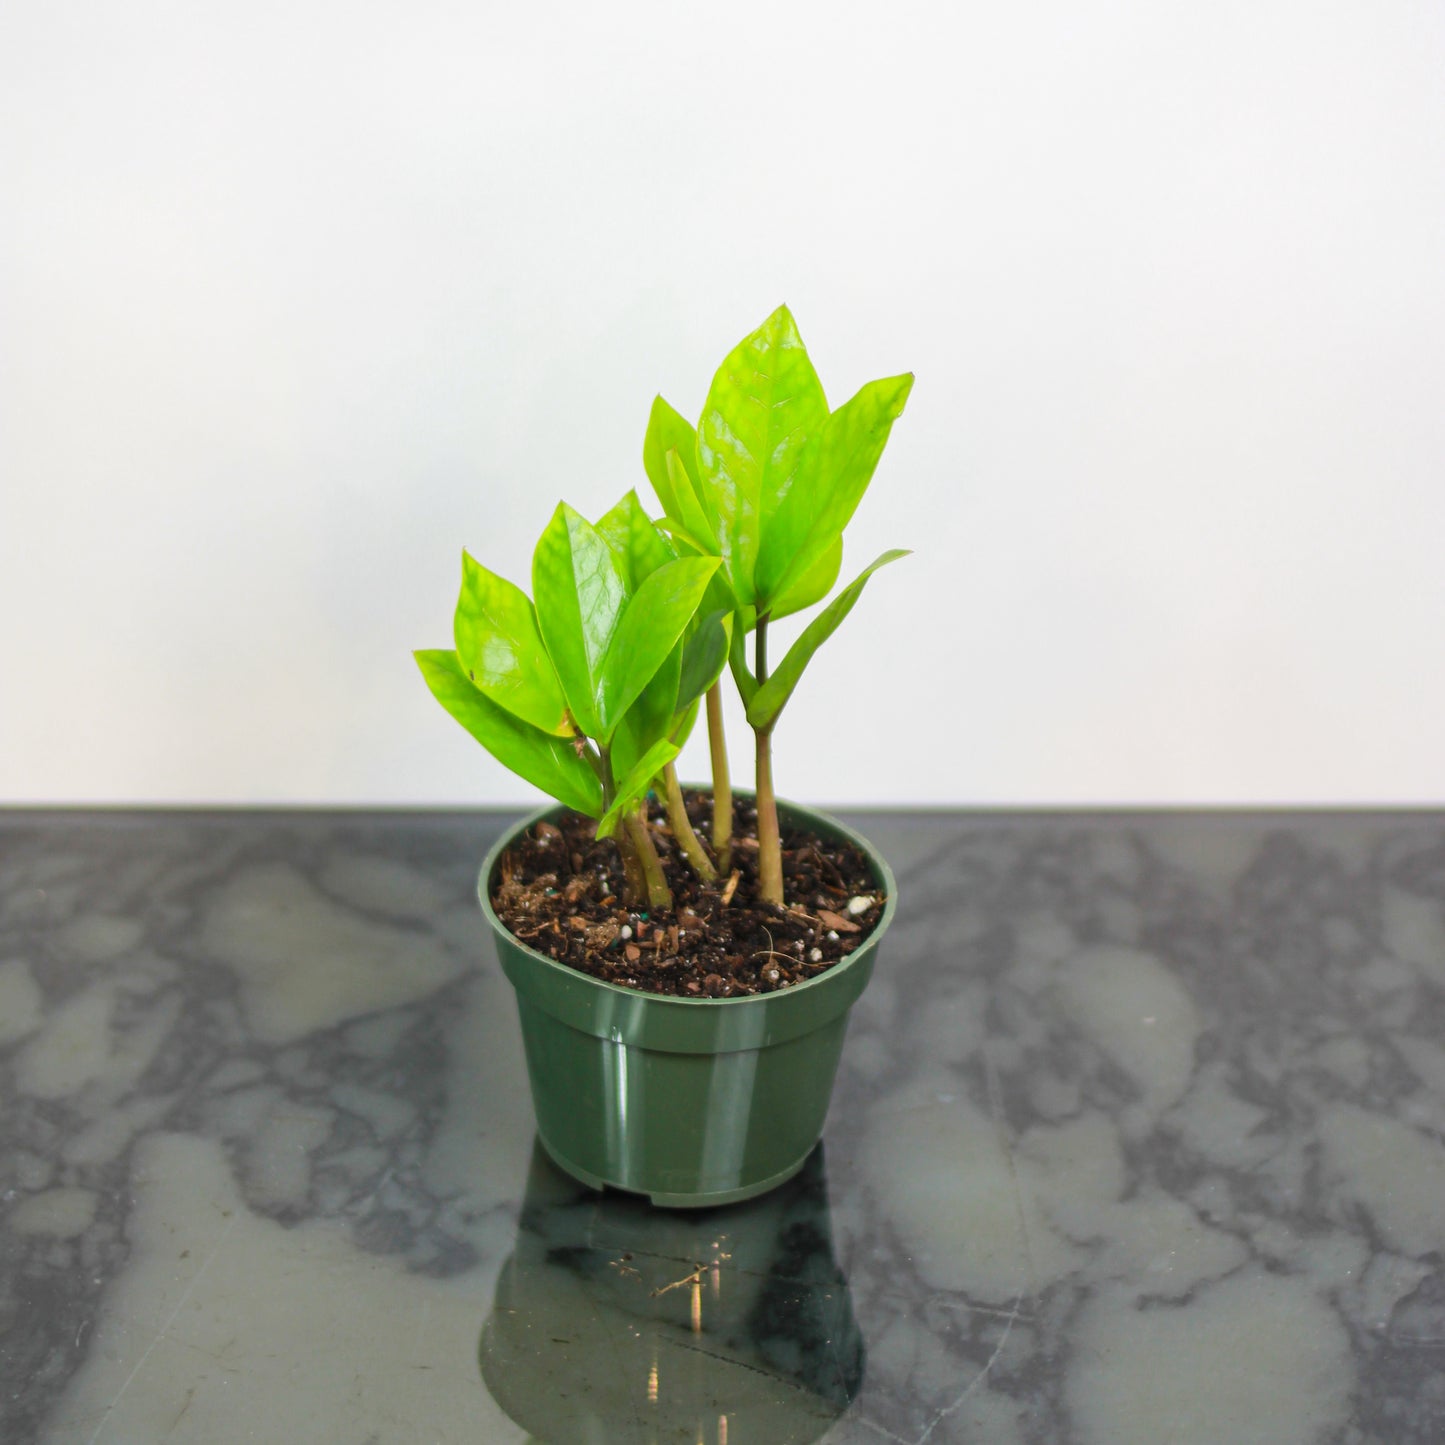 zz Plant, Zanzibar Gem (Zamioculcas zamiifolia) in a 4 inch pot. Indoor plant for sale by Promise Supply for delivery and pickup in Toronto